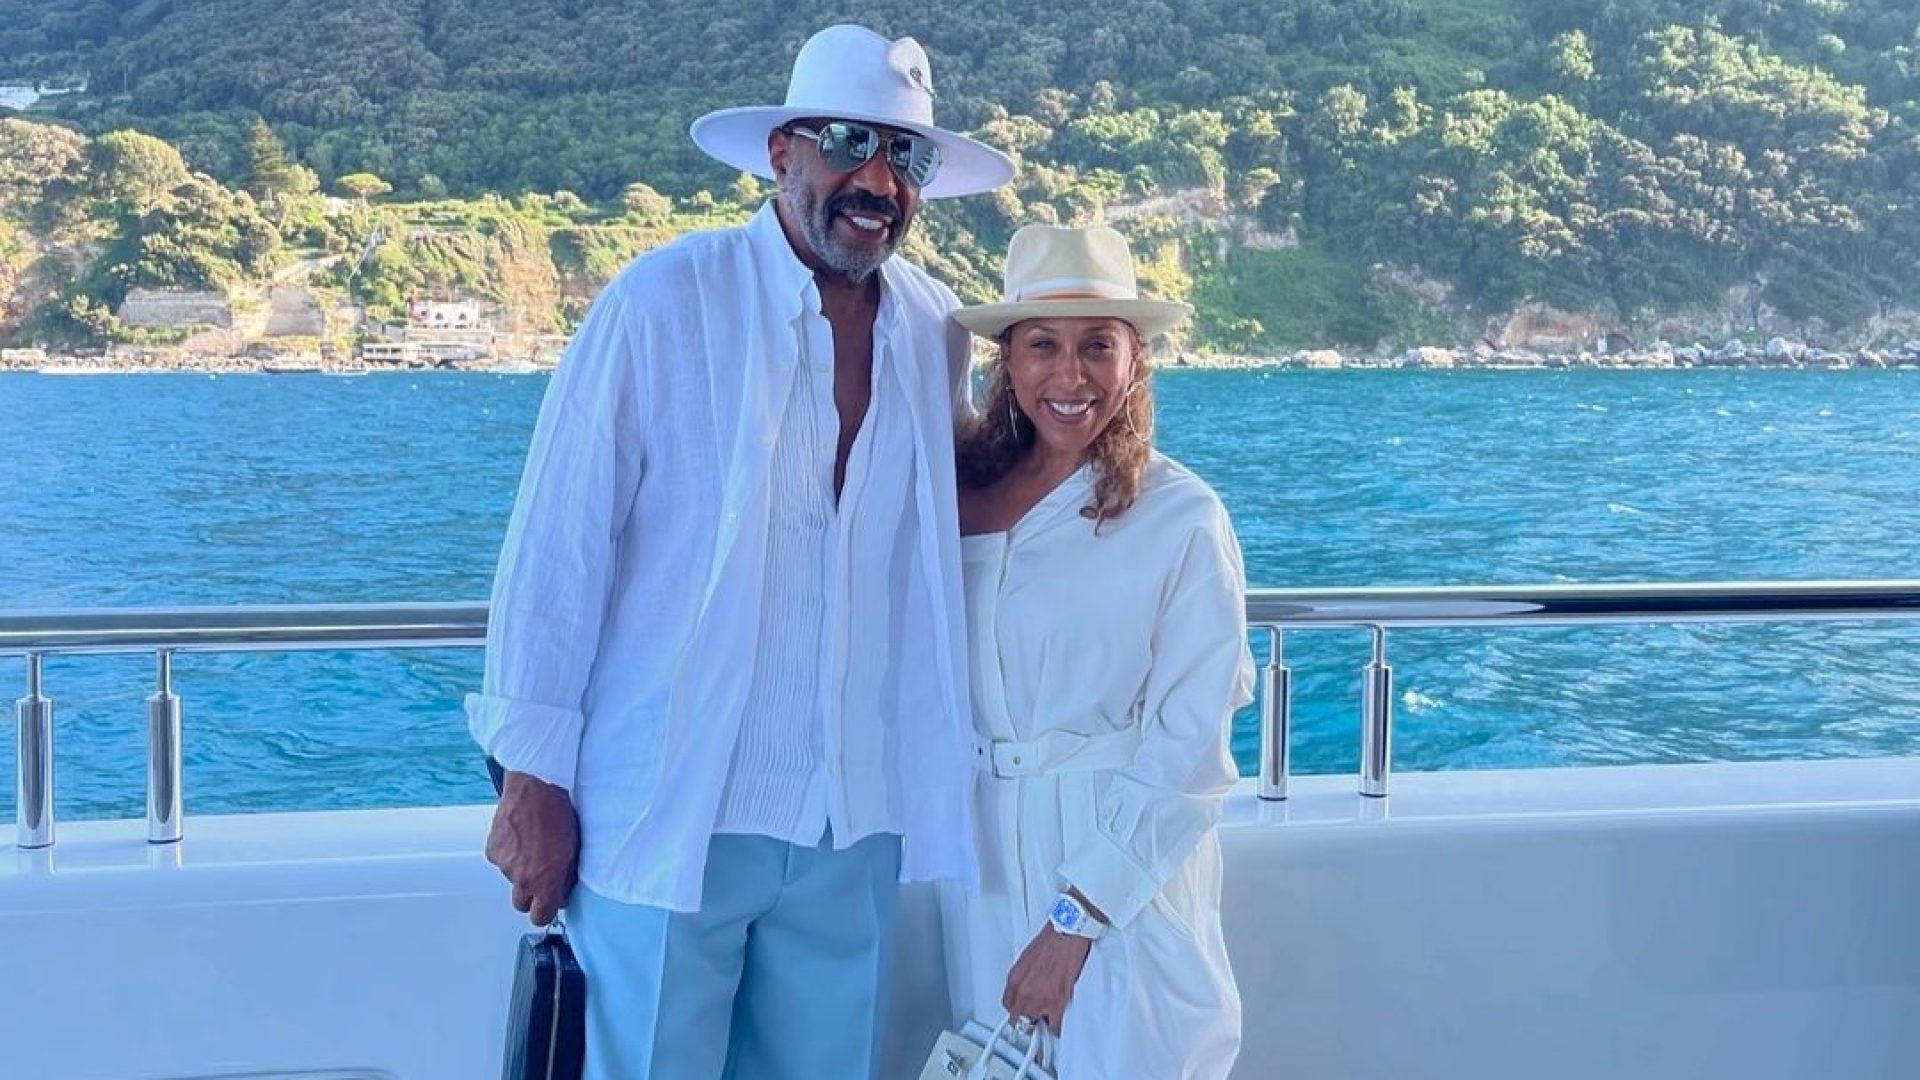 Steve And Marjorie Harvey Celebrate Their 17th Anniversary With Sicilian Views In Italy